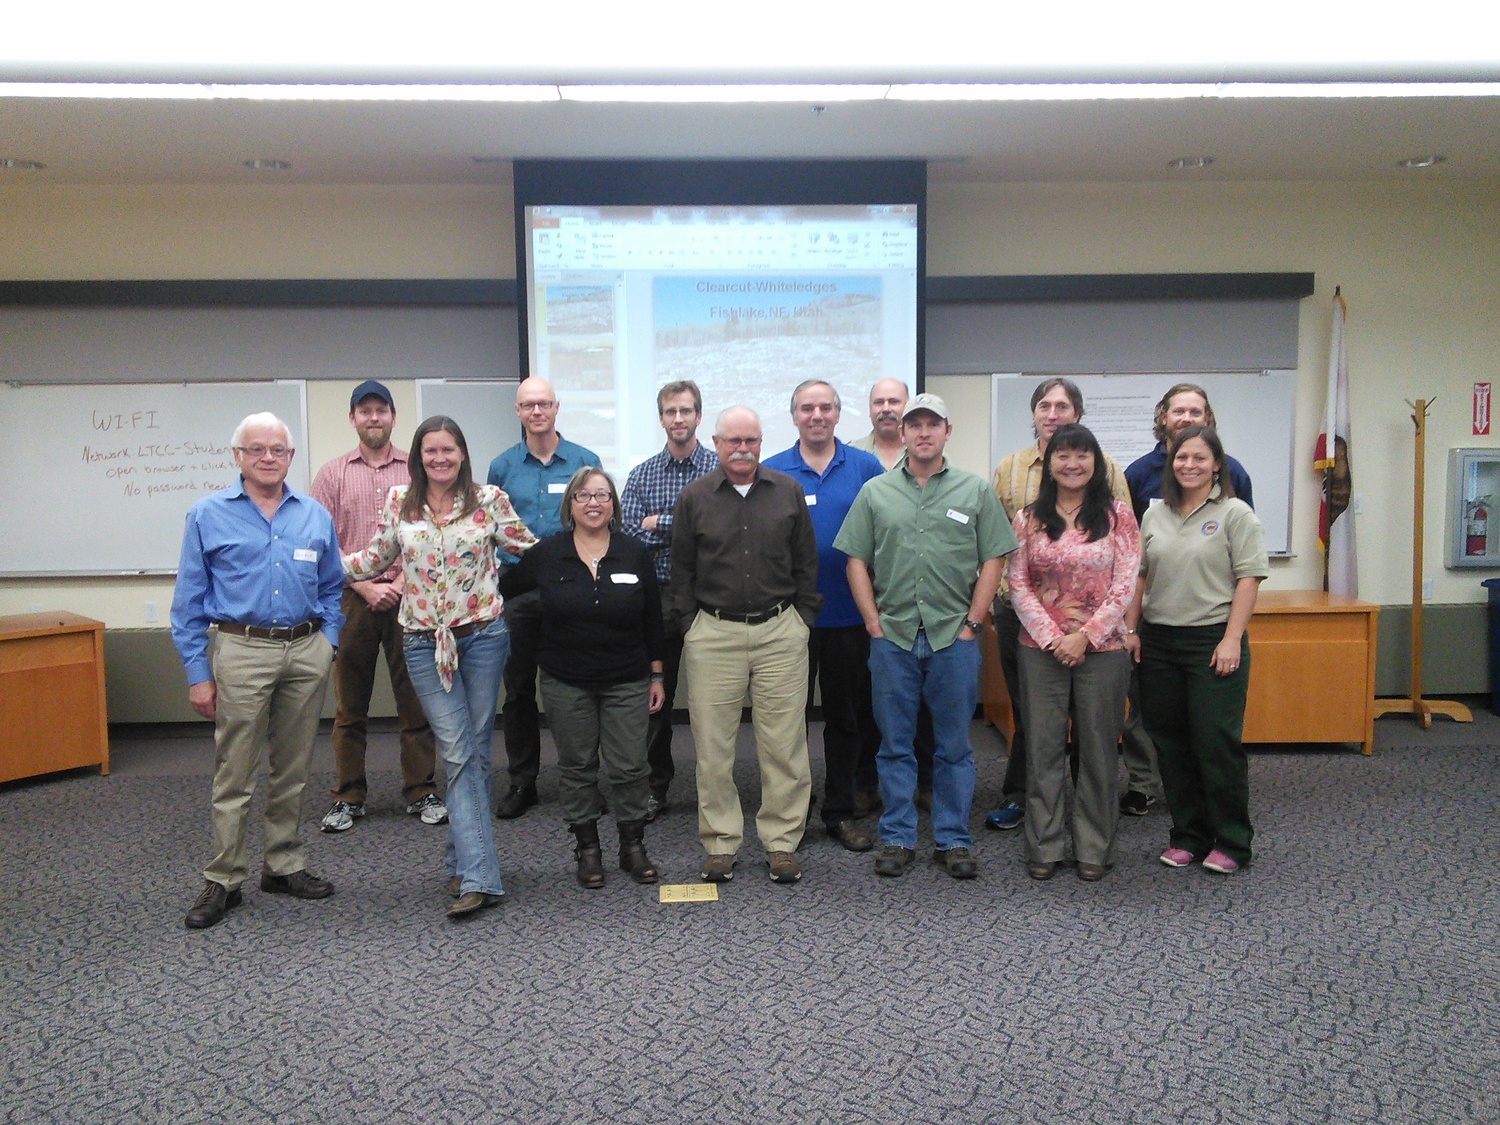 A special thanks to all of our presenters who traveled from near and far to share in this workshop